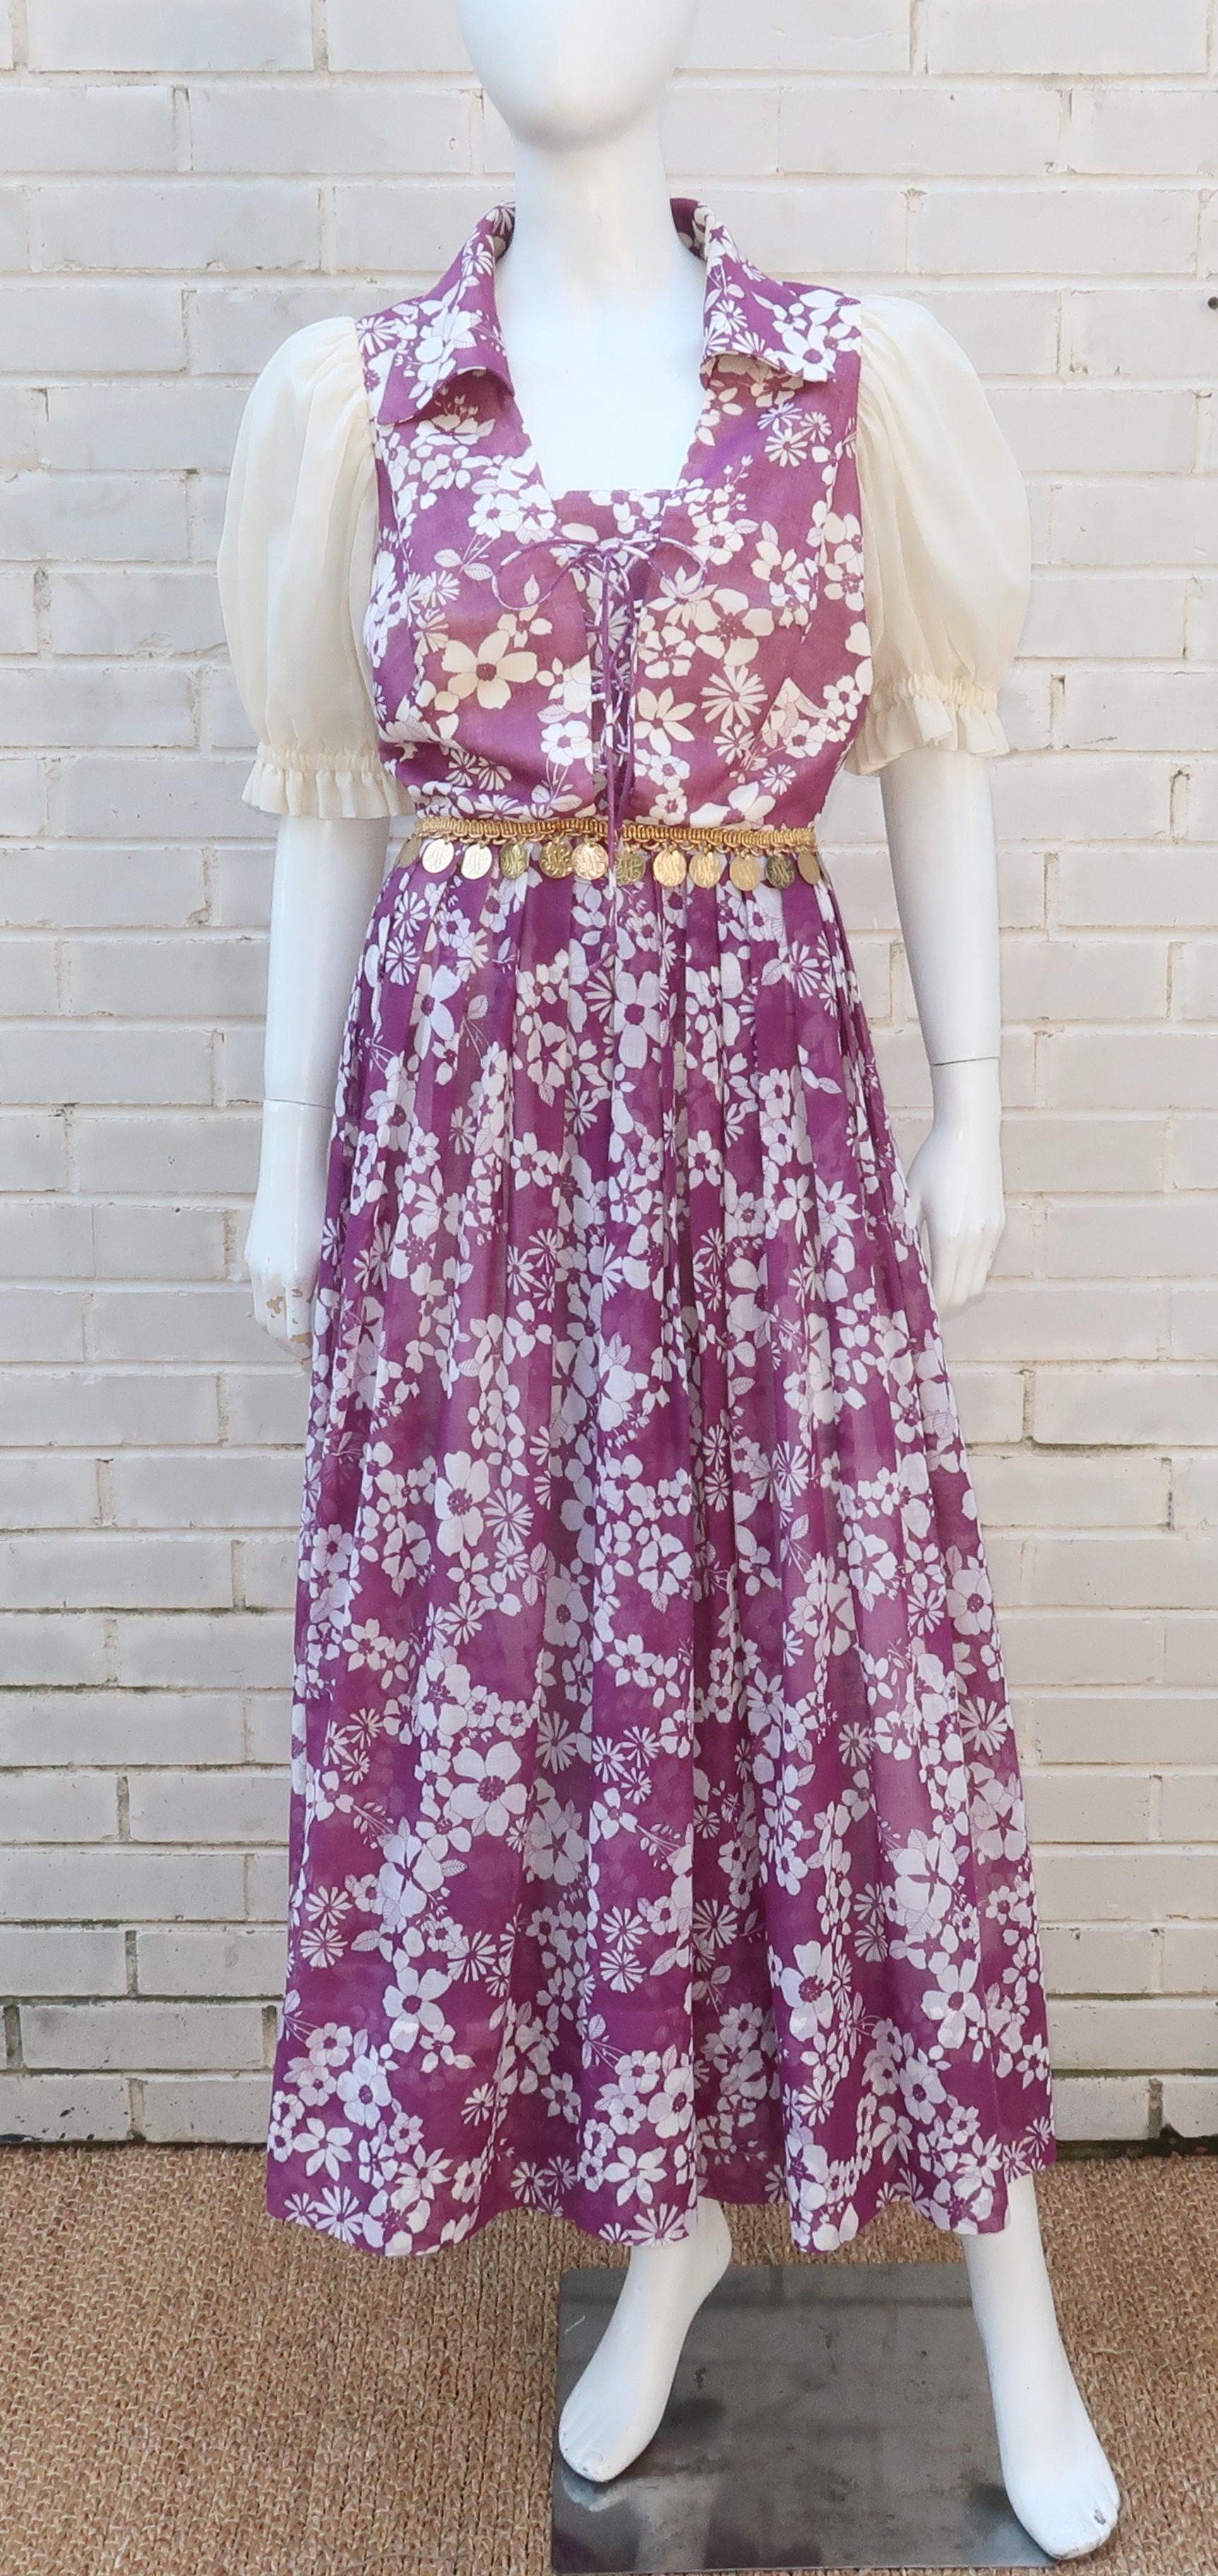 This C.1970 peasant dress design is a mix of hippie meets gypsy with an ethereal lightweight cotton blend fabric in a creme and purple floral print.  The midi length is actually a surprise split skirt providing the ease of a jumpsuit with the